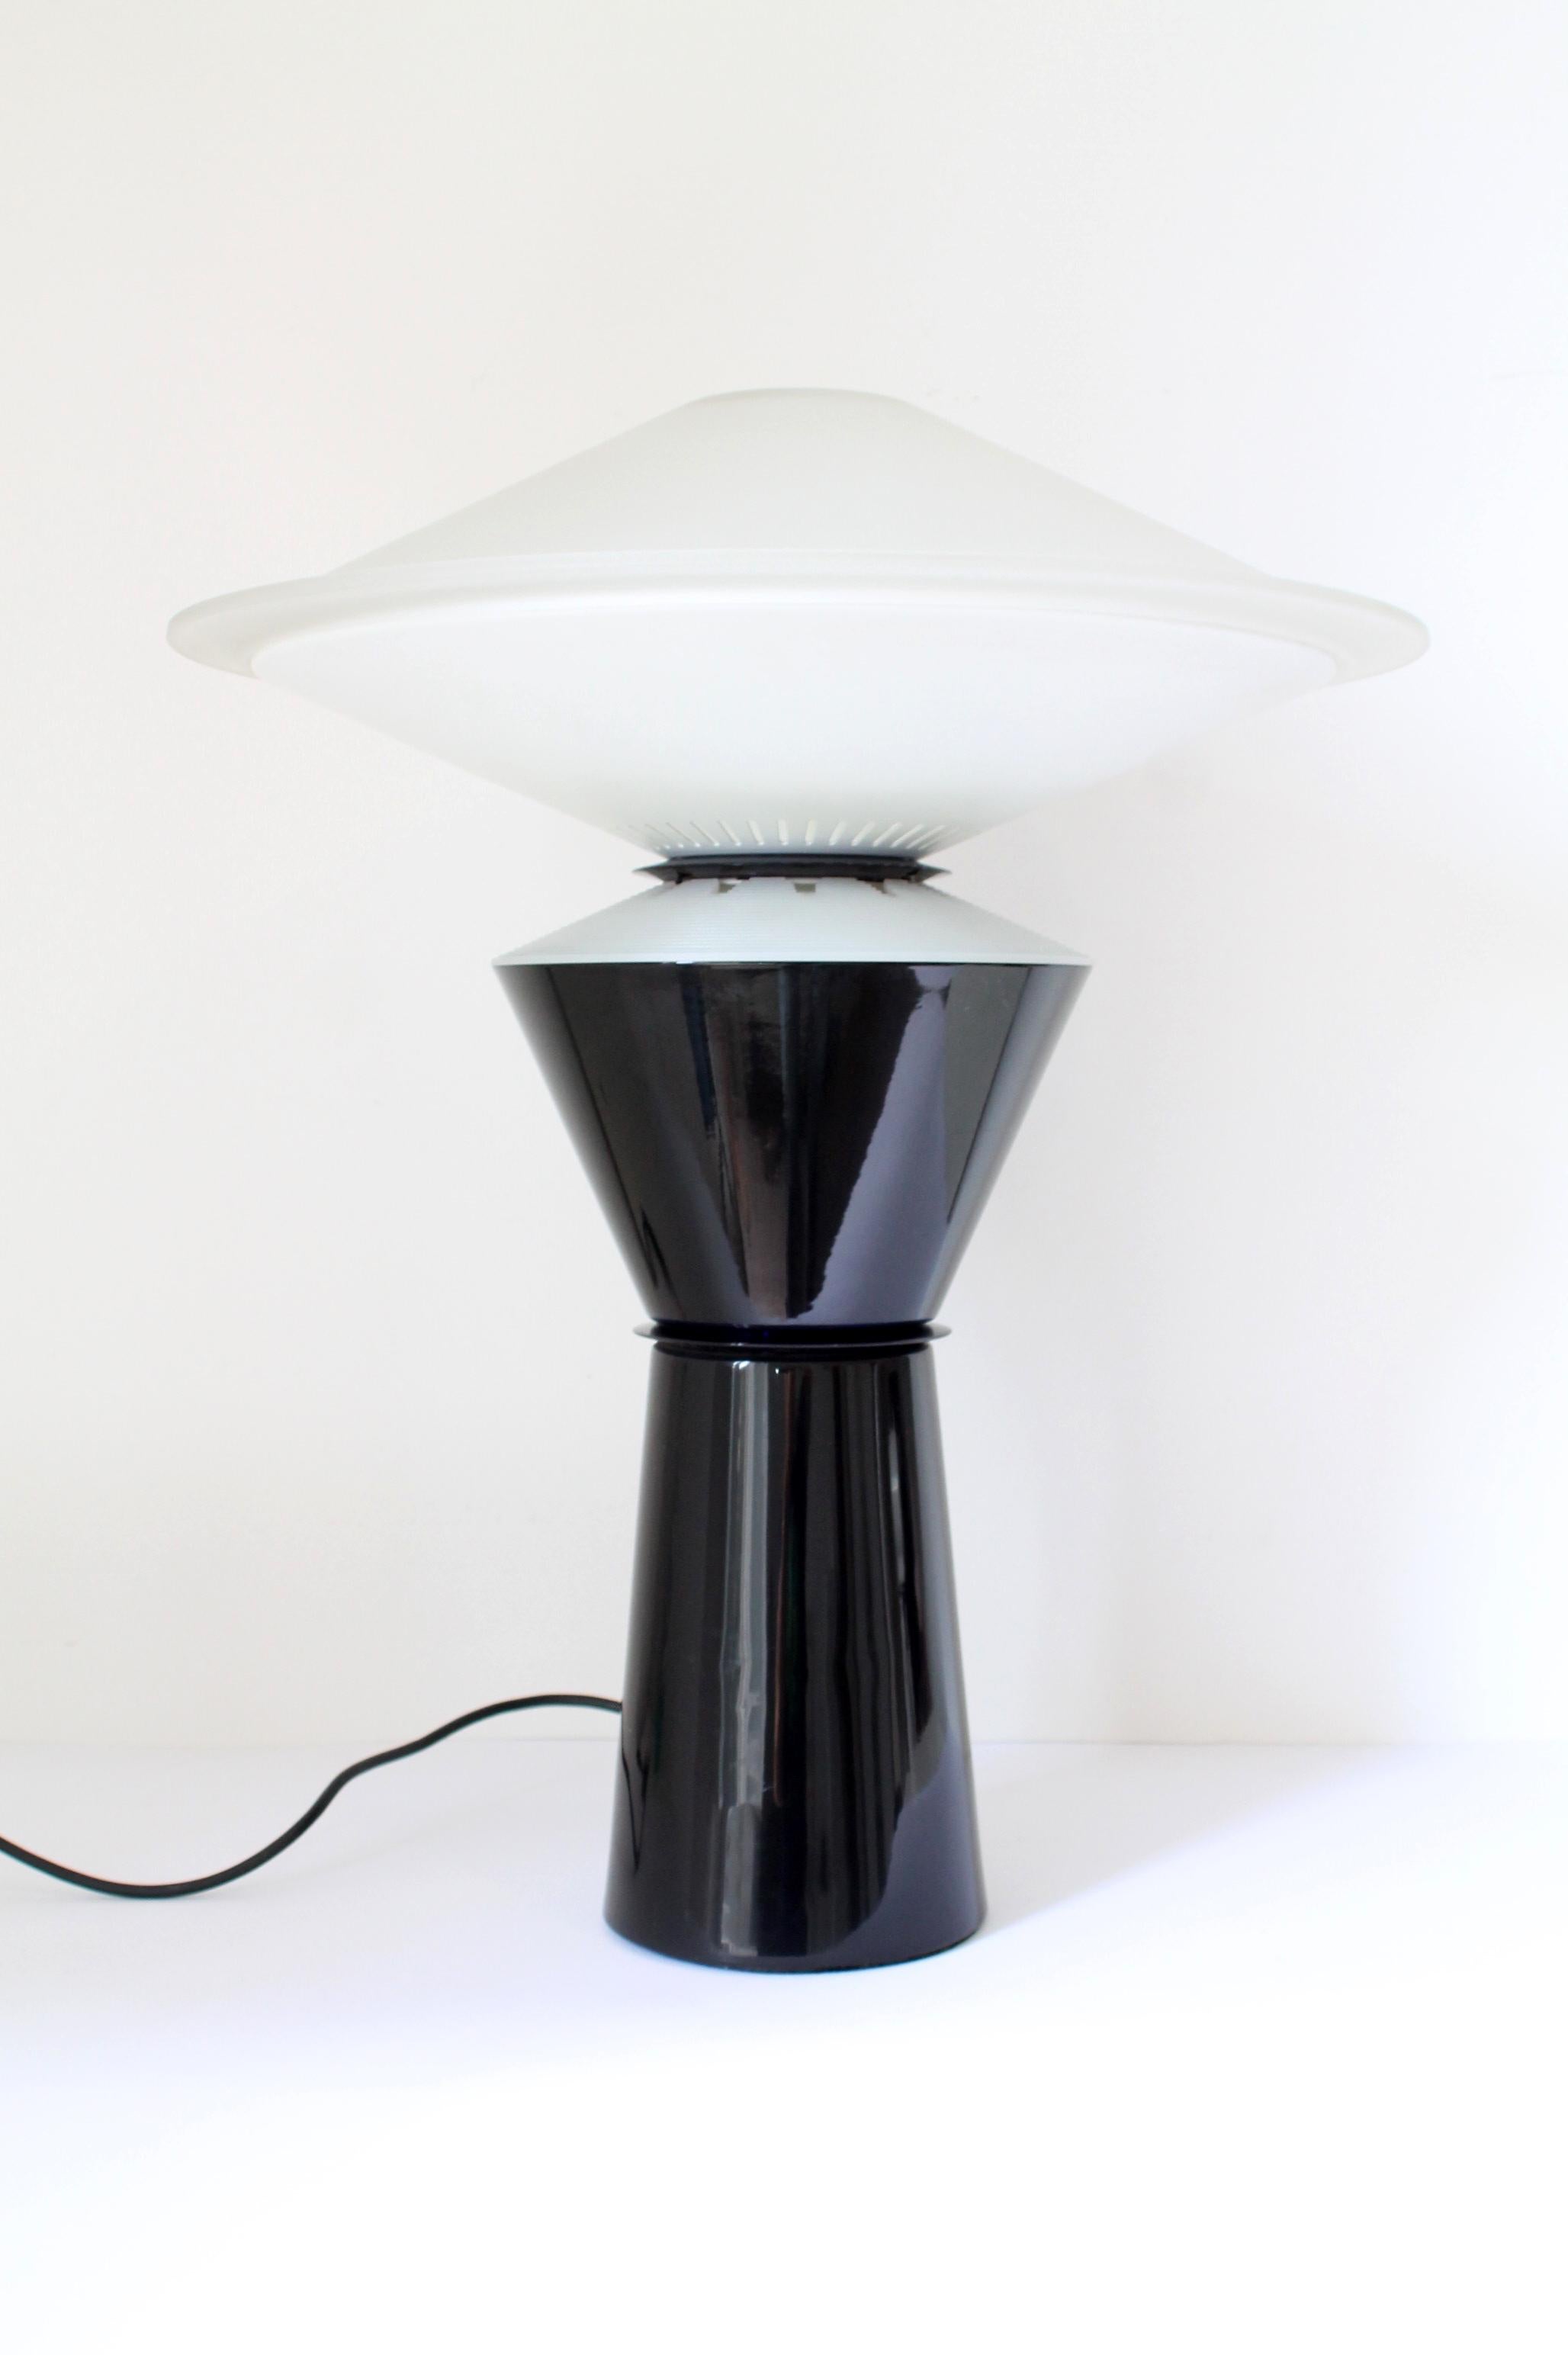 1980s Arteluce “Giada” table lamp by Pier Giuseppe Ramella.
A black lacquered metal base with a beautiful inner blue/purple lighted rim supports two thick frosted glass shells.

The switch allows enlighting separately the base and the lower side